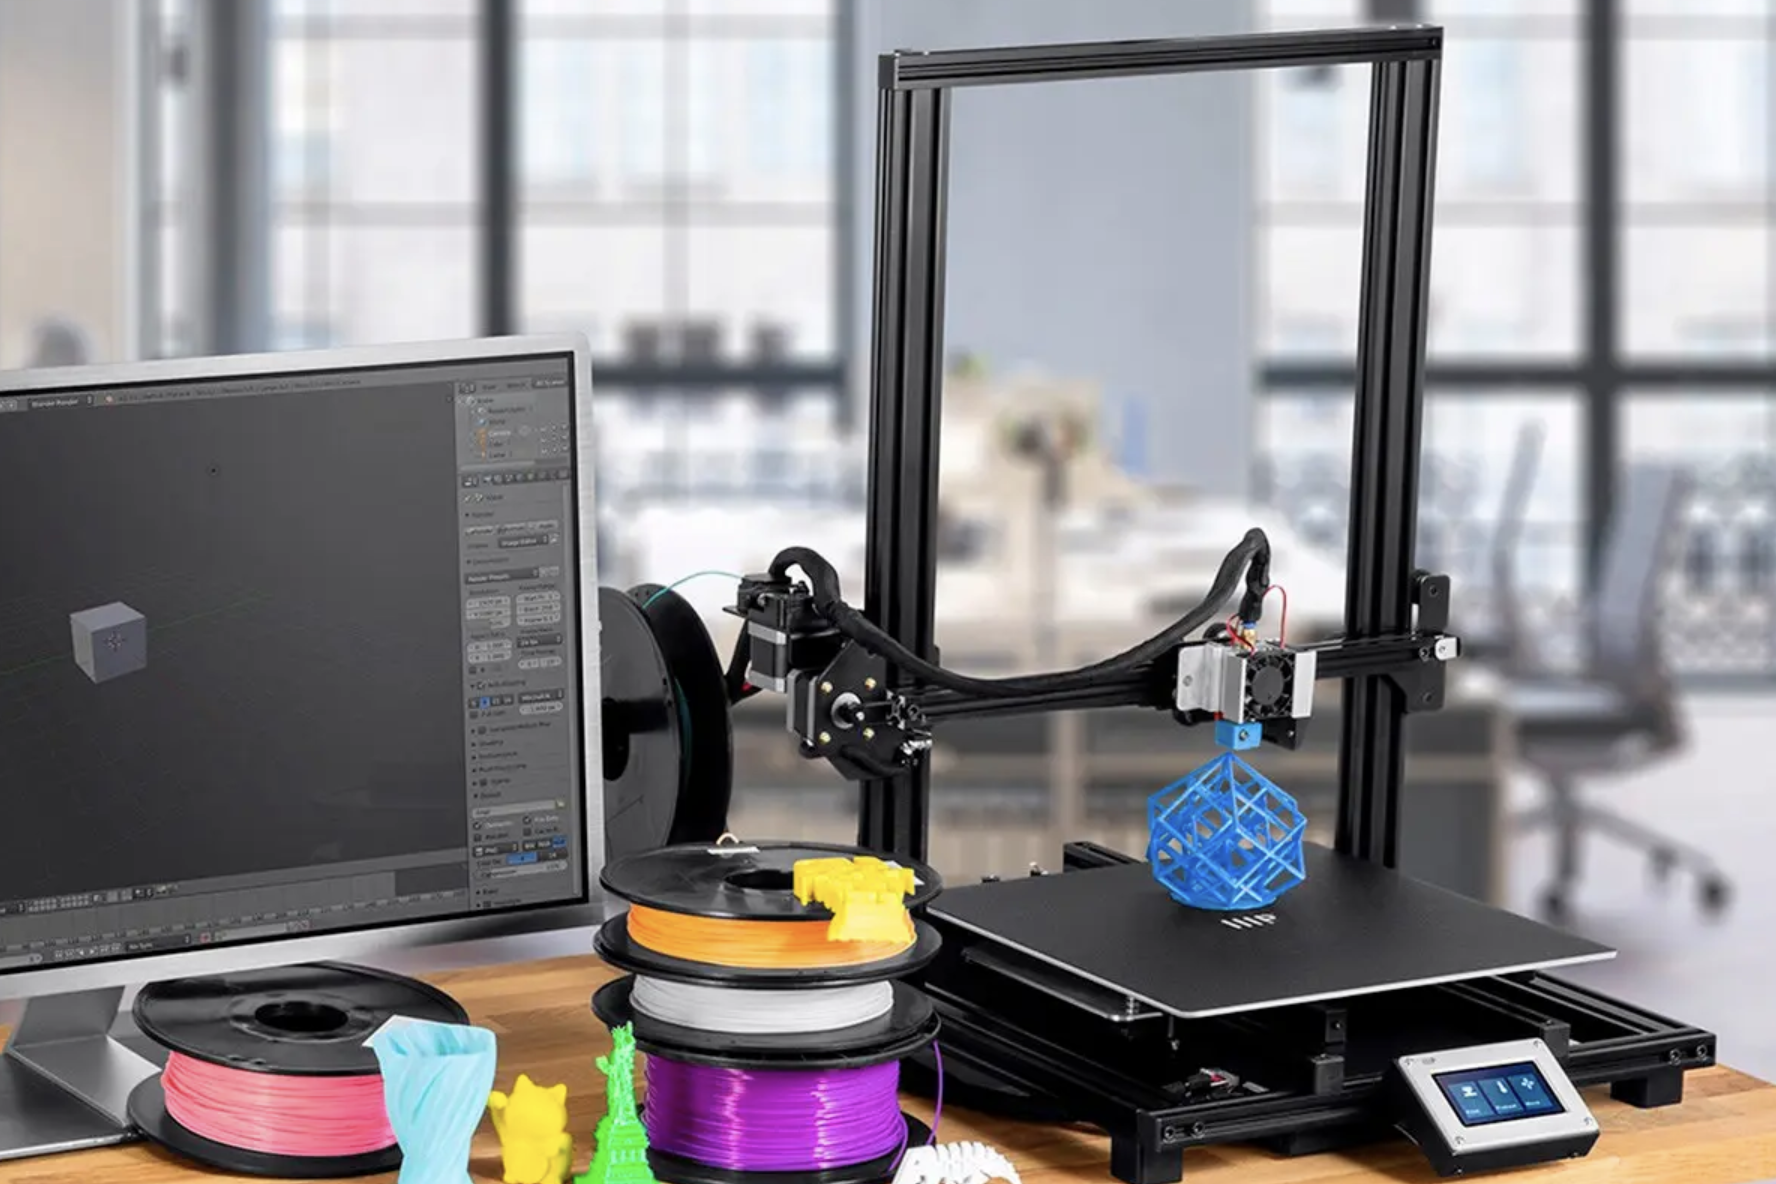 A Monoprice MP10 3D Printer is creating an octahedron in blue plastic.